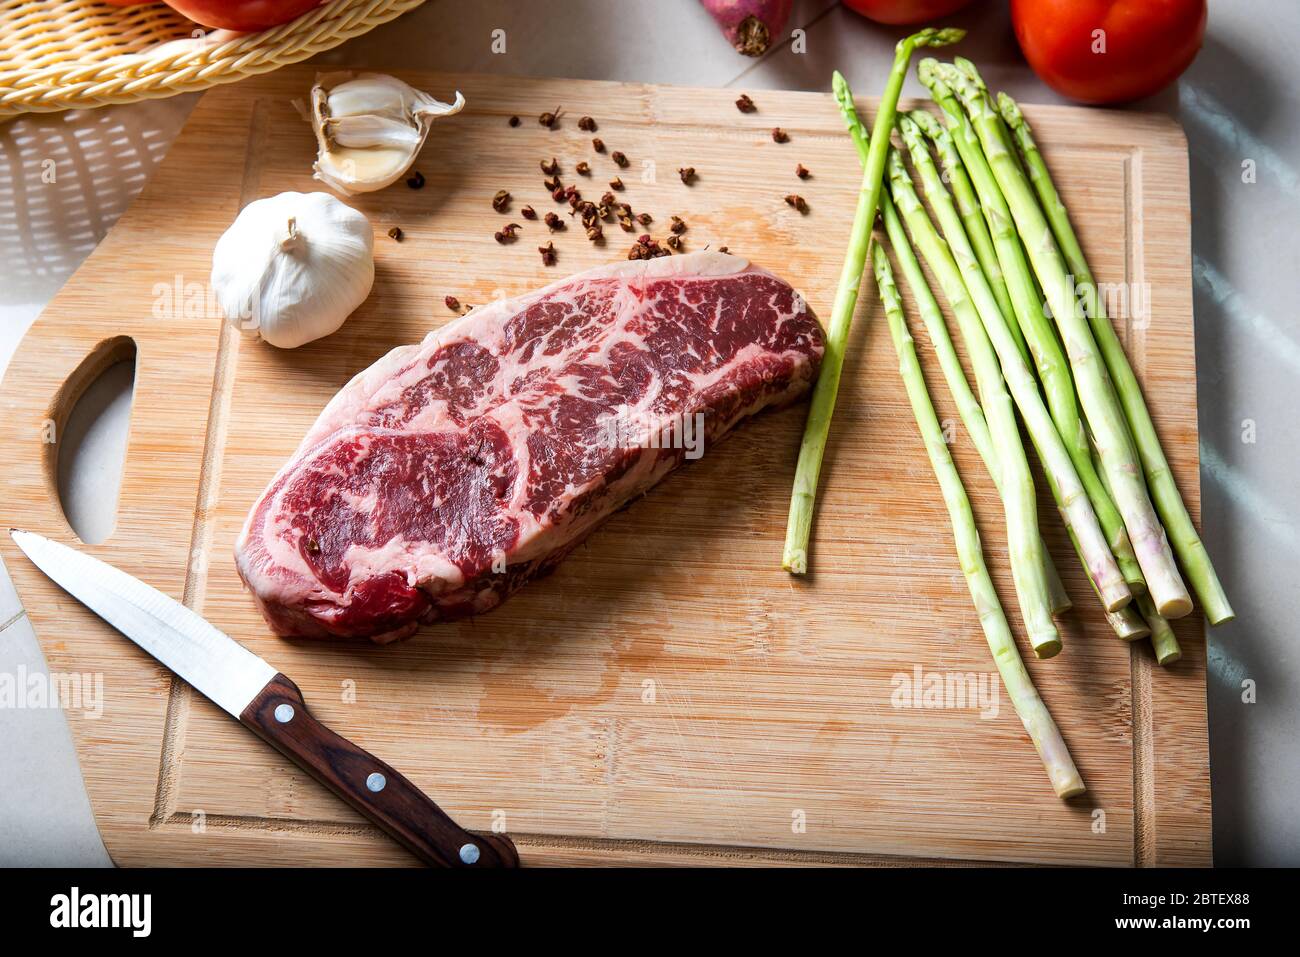 Wagyu Japanese beef steak on the cutting board with vegetables Stock Photo